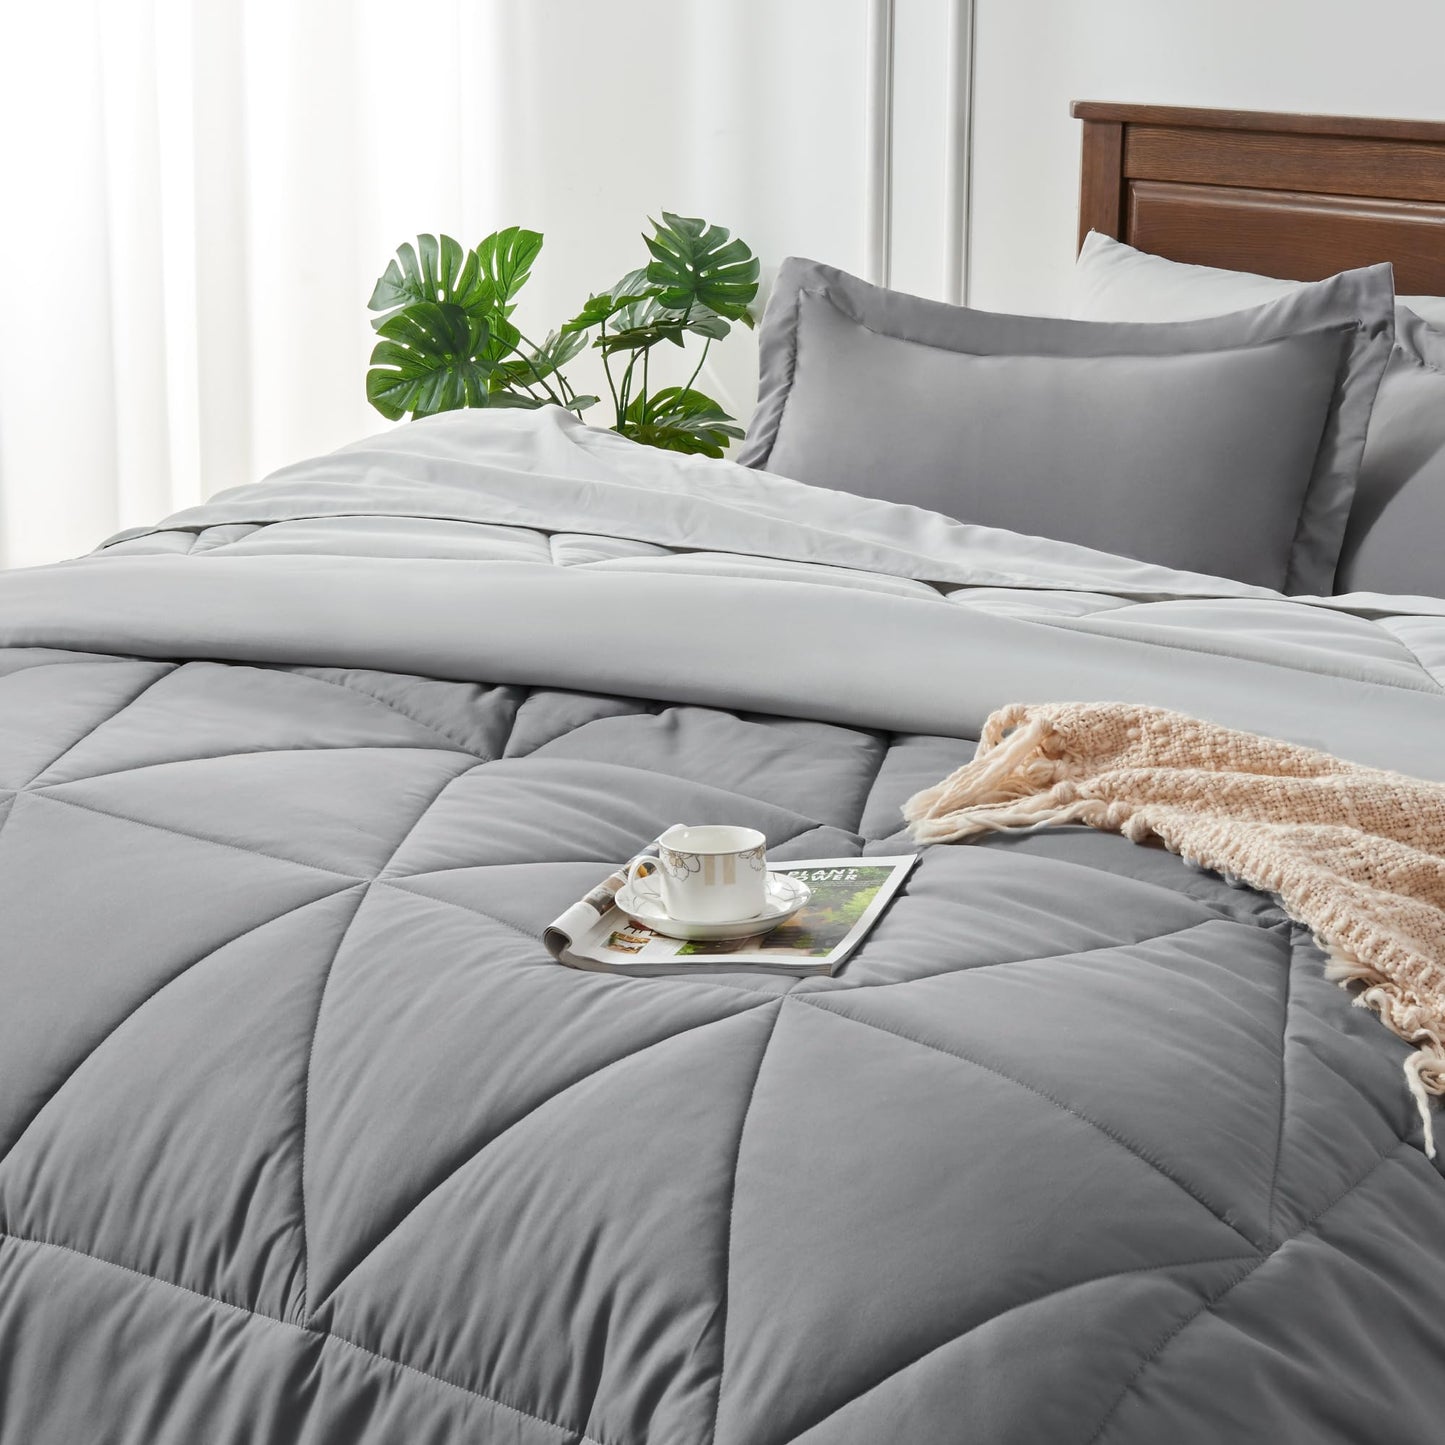 BEDELITE Twin XL Comforter Set 5 Pieces Bed in A Bag - Soft Microfiber Reversible Twin Extra Long Grey Bed Set with Comforters, Sheets, Pillowcase & Sham, Cozy Luxury Bedding Sets for All Season